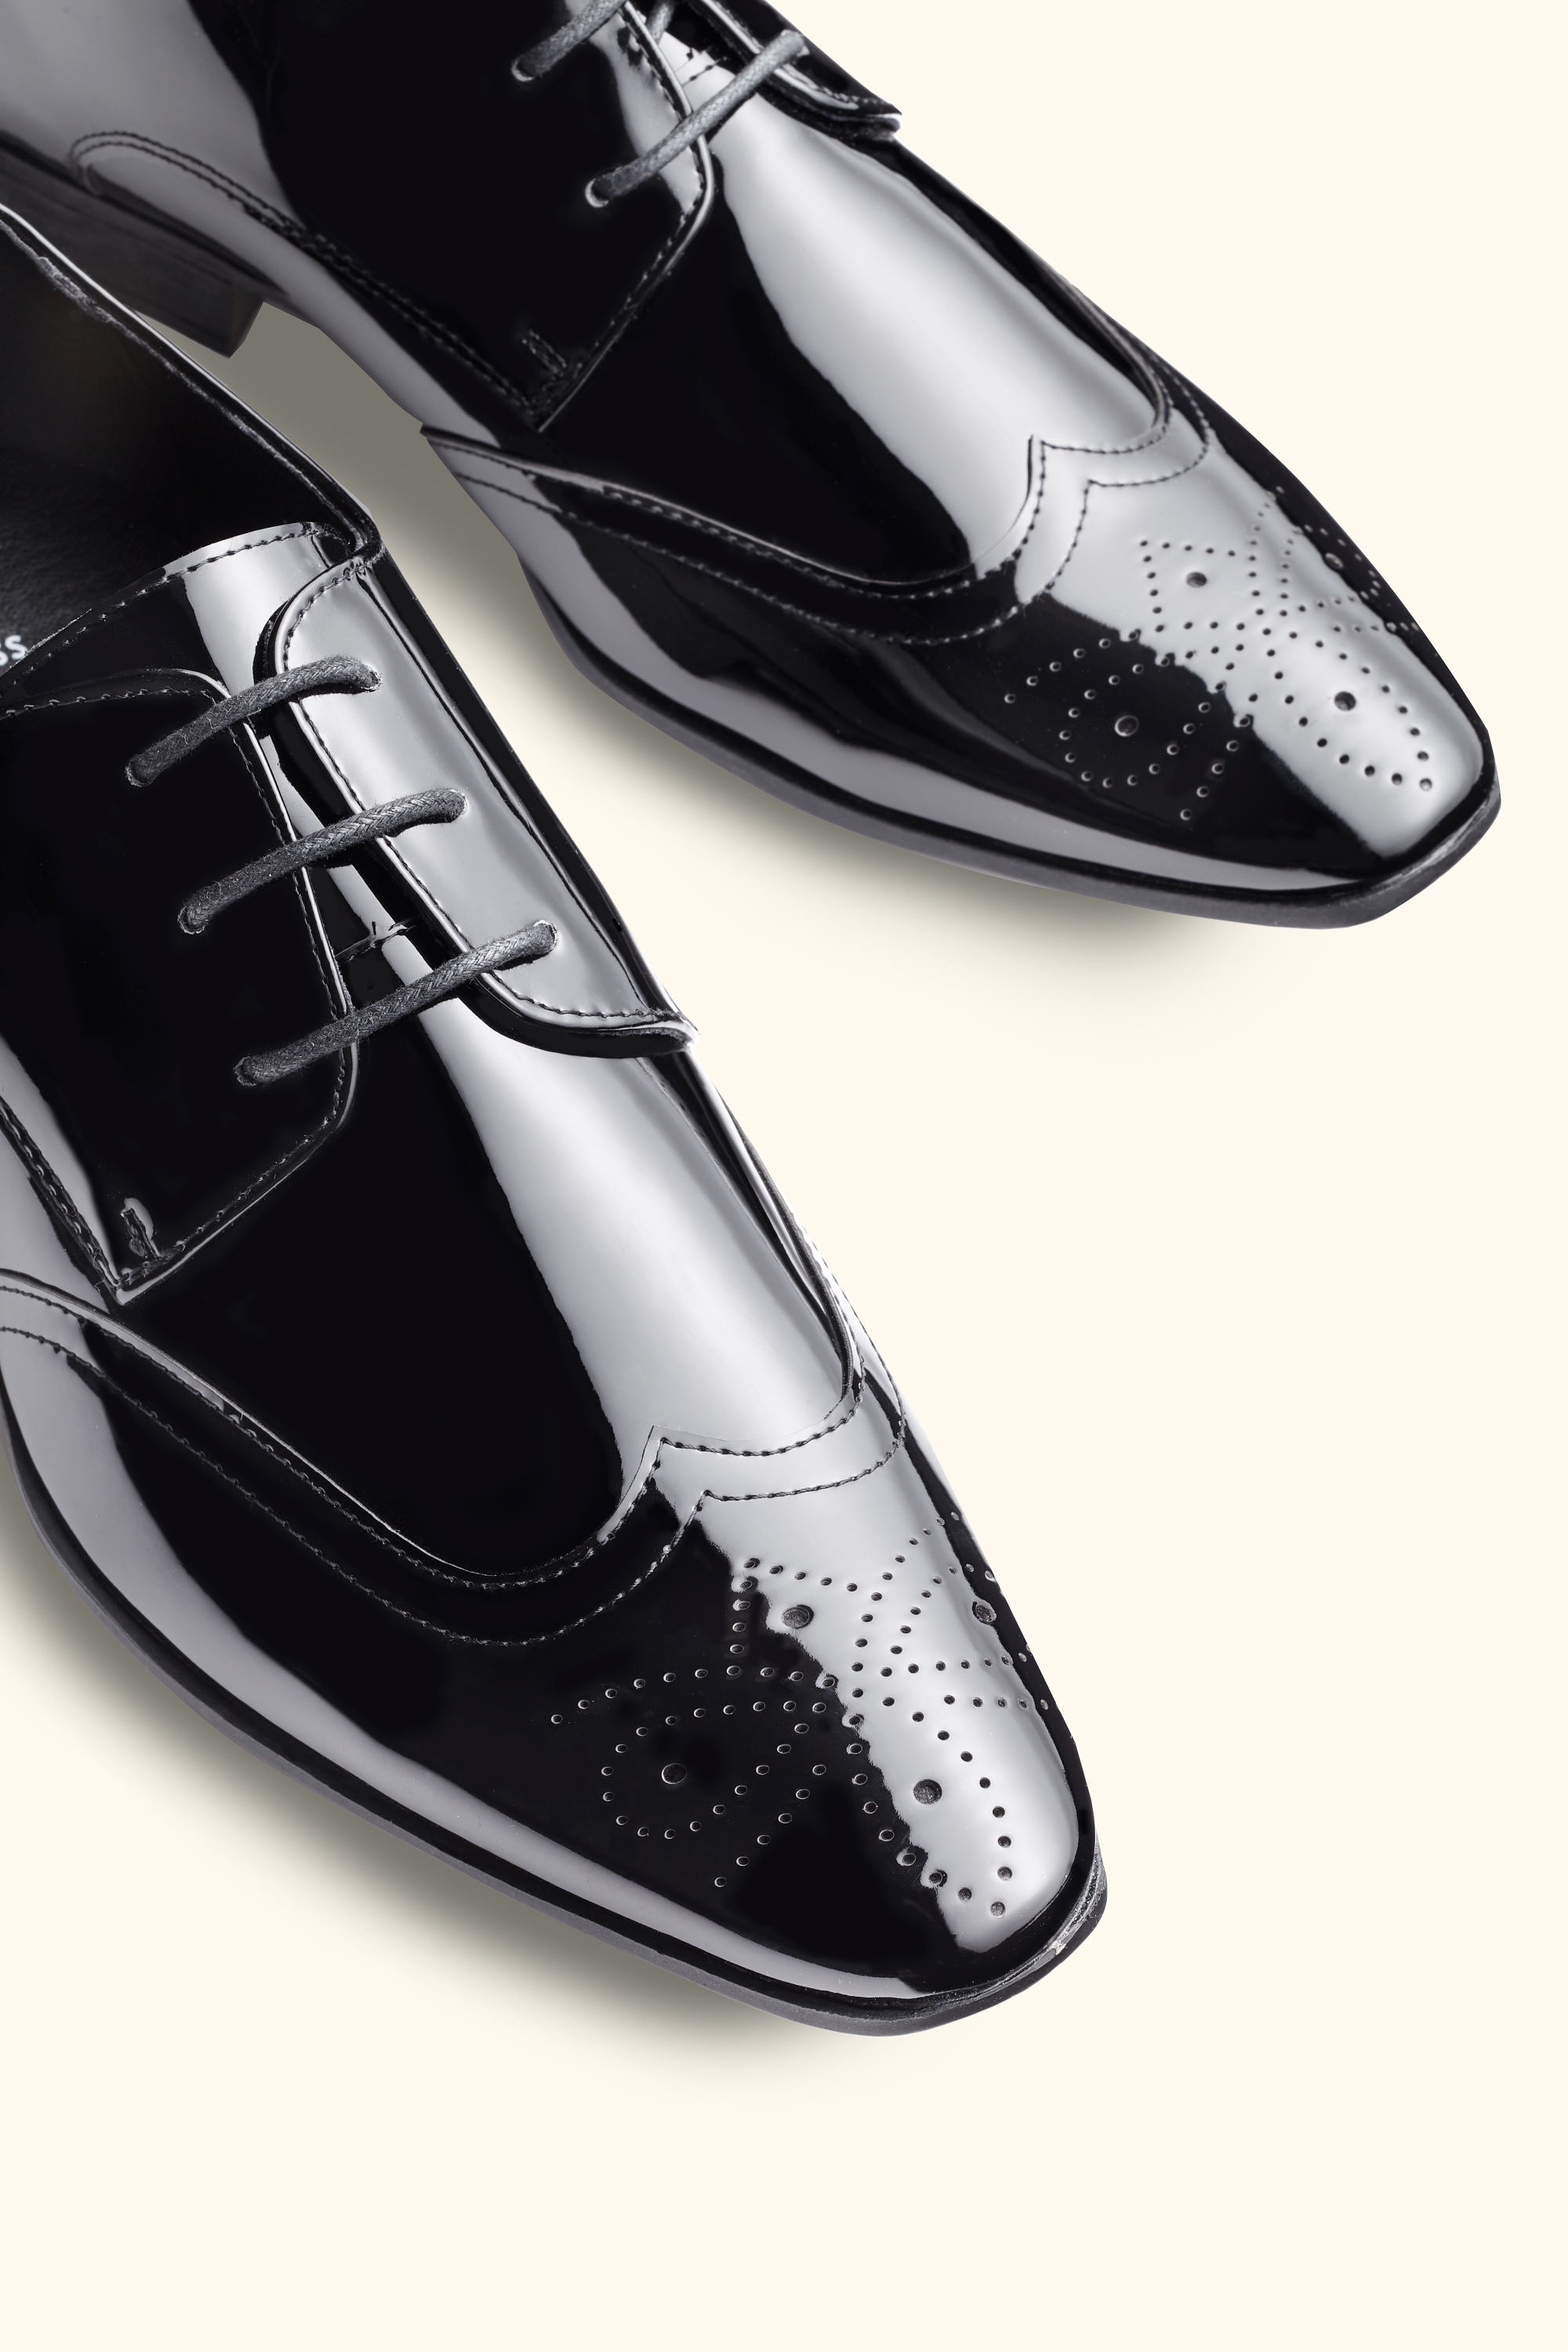 dress shoes you can walk in